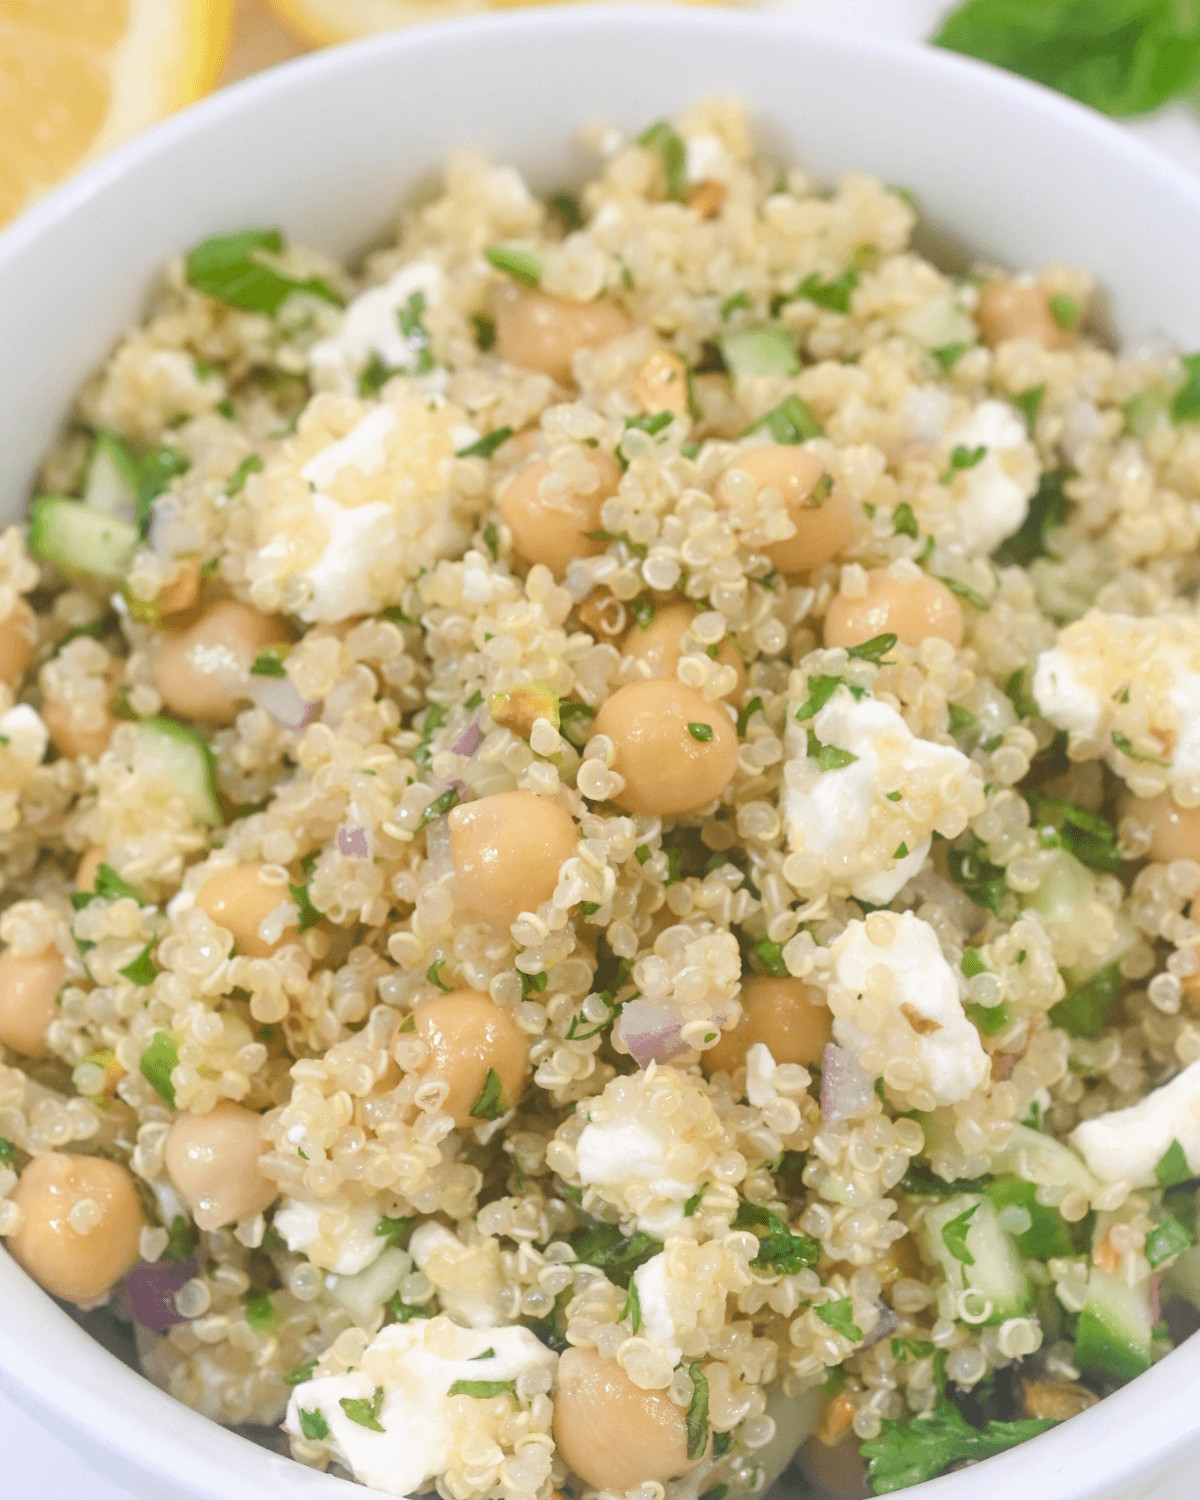 A bowl of Jennifer Aniston salad with quinoa, chickpeas, cucumber, feta cheese, and herbs, garnished with lemon slices.